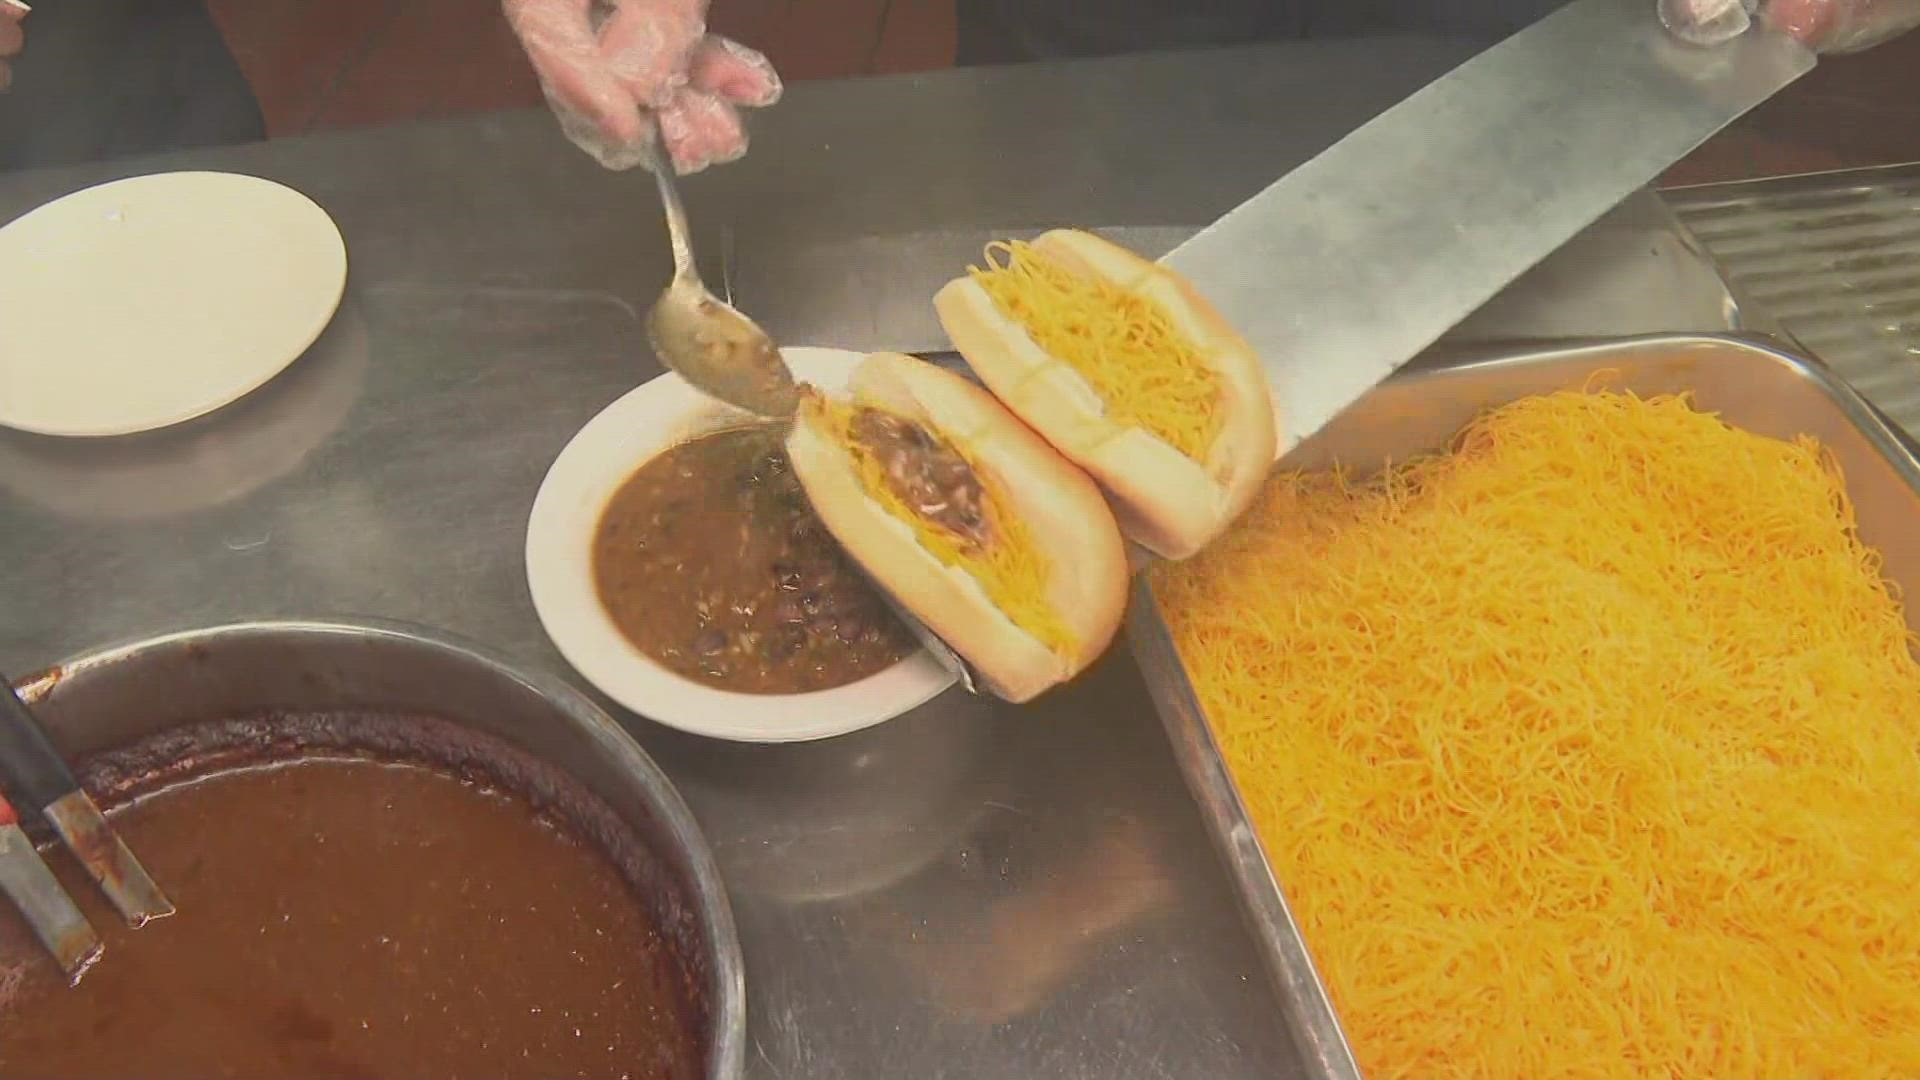 Skyline Chili has a special way to prepare their vegetarian chili dog option.